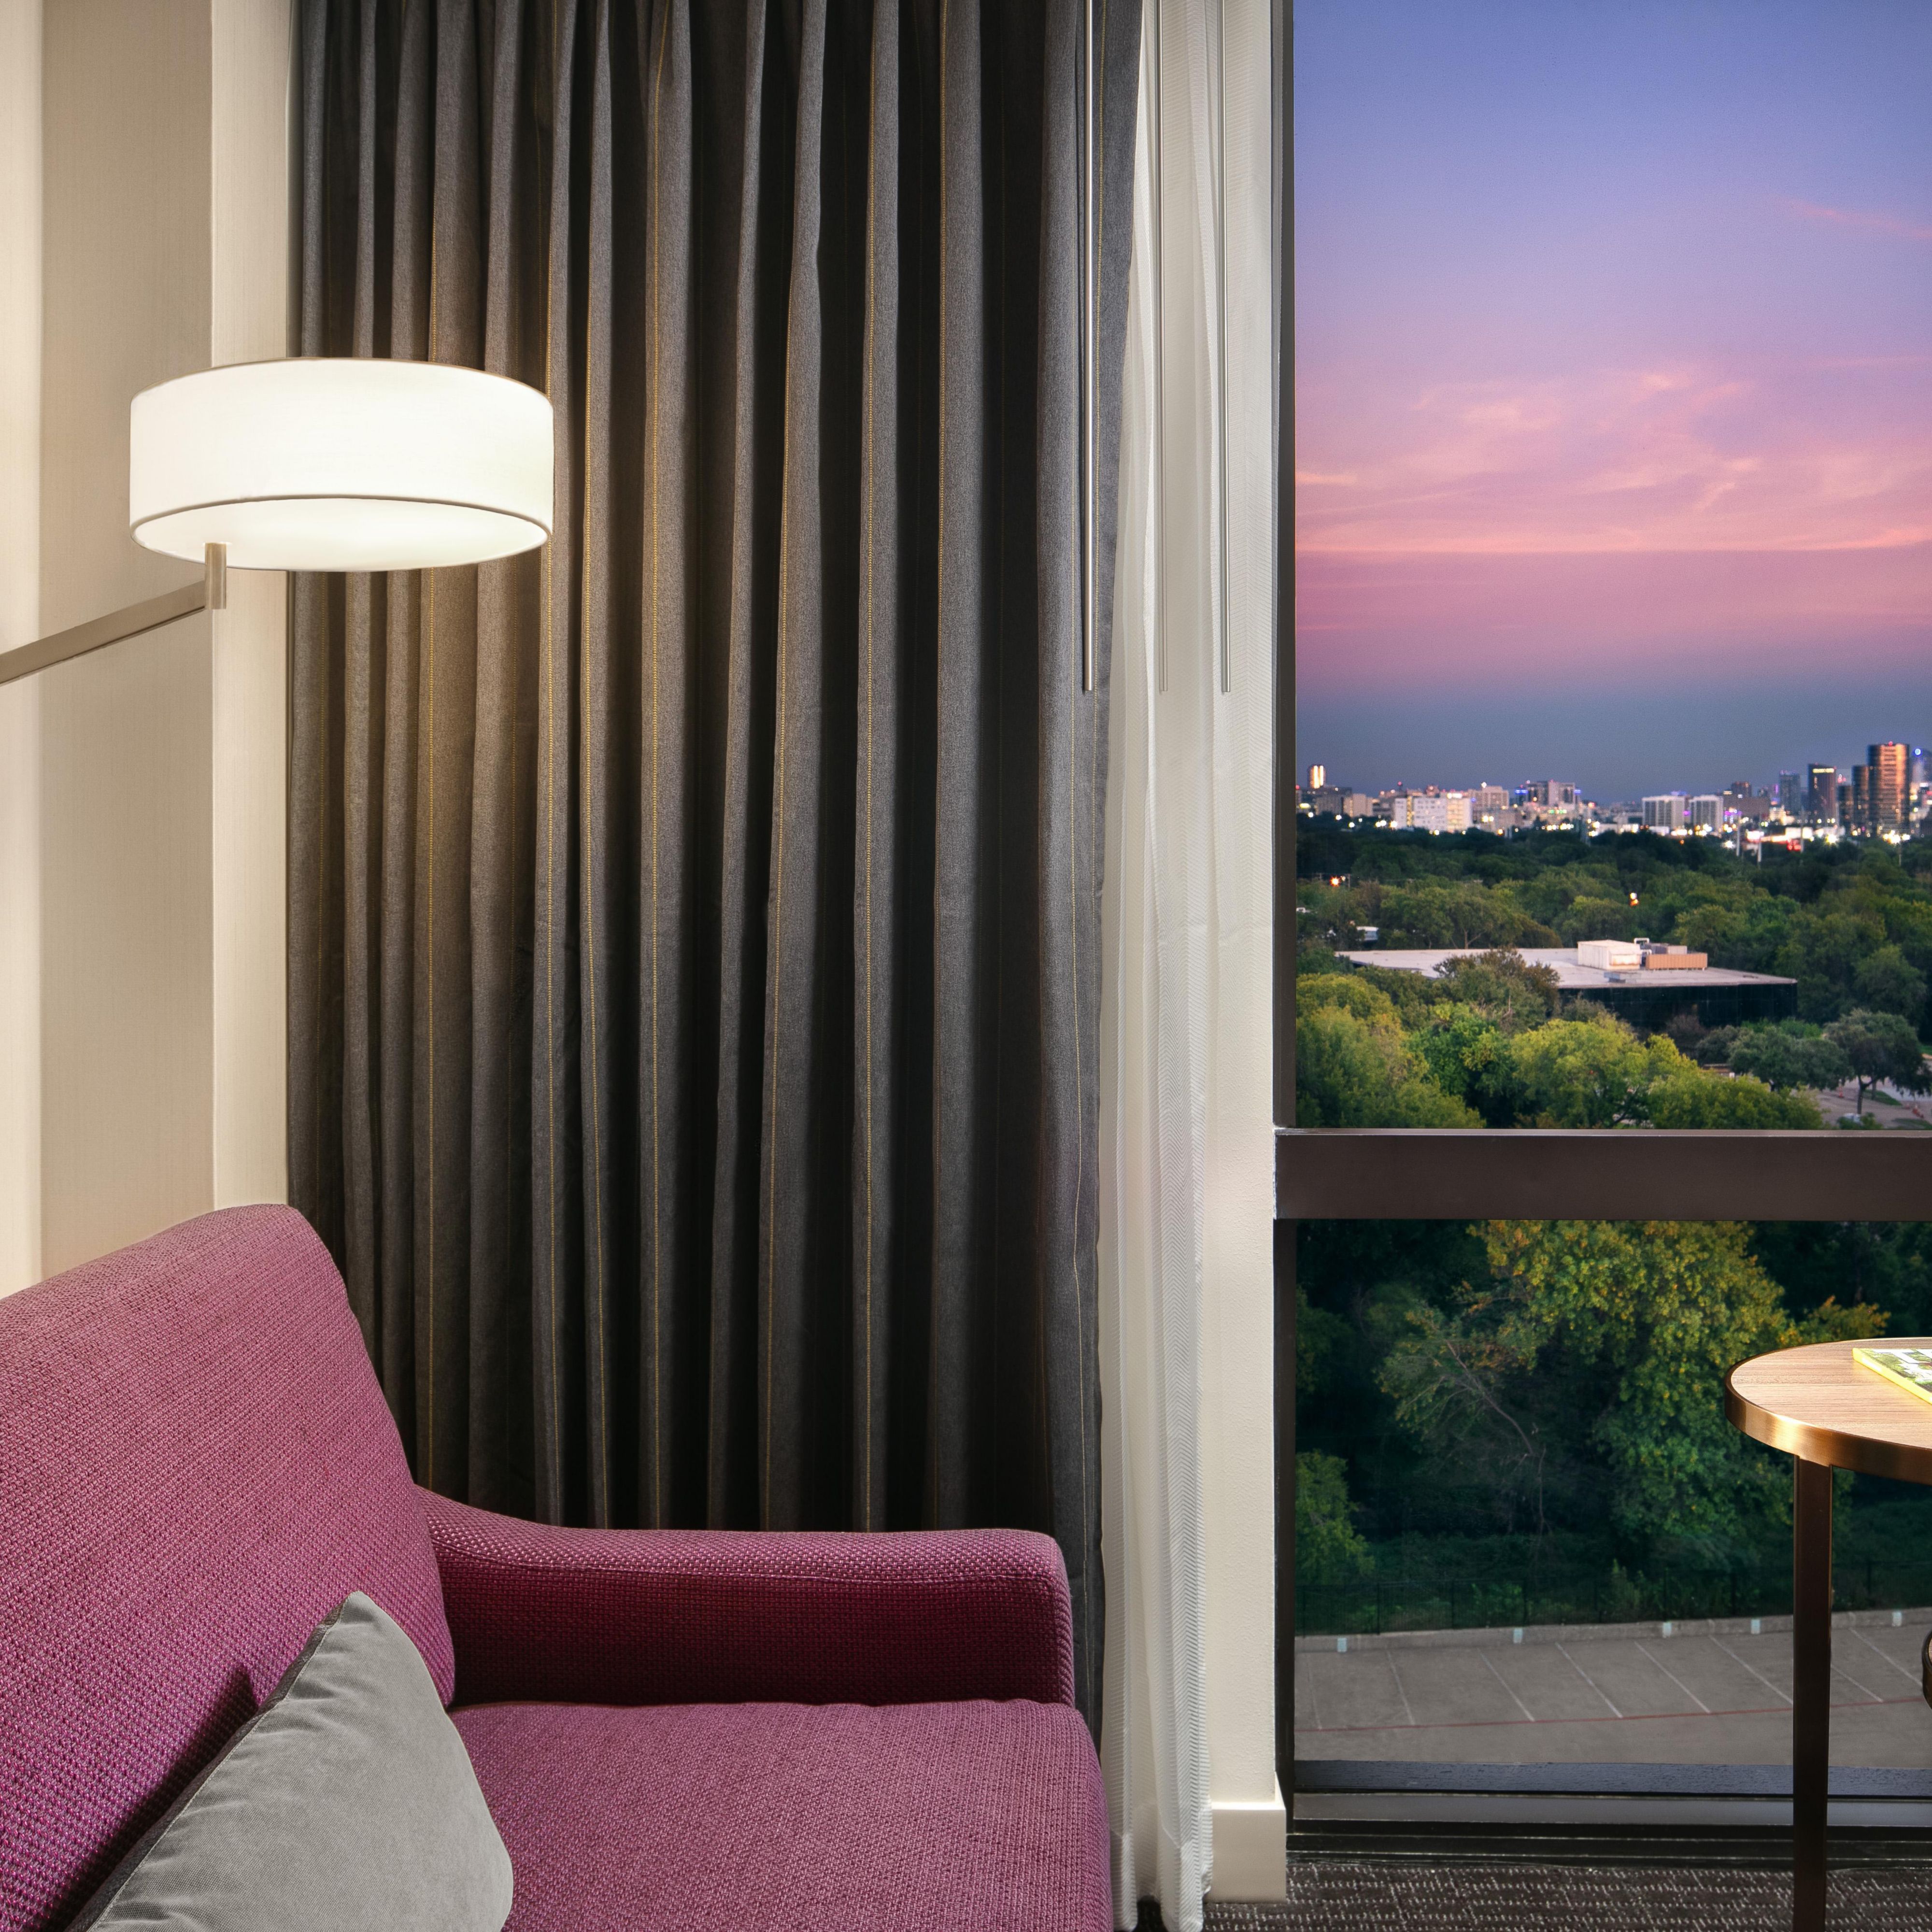 Reserve a city view guest room for stunning skyline views.